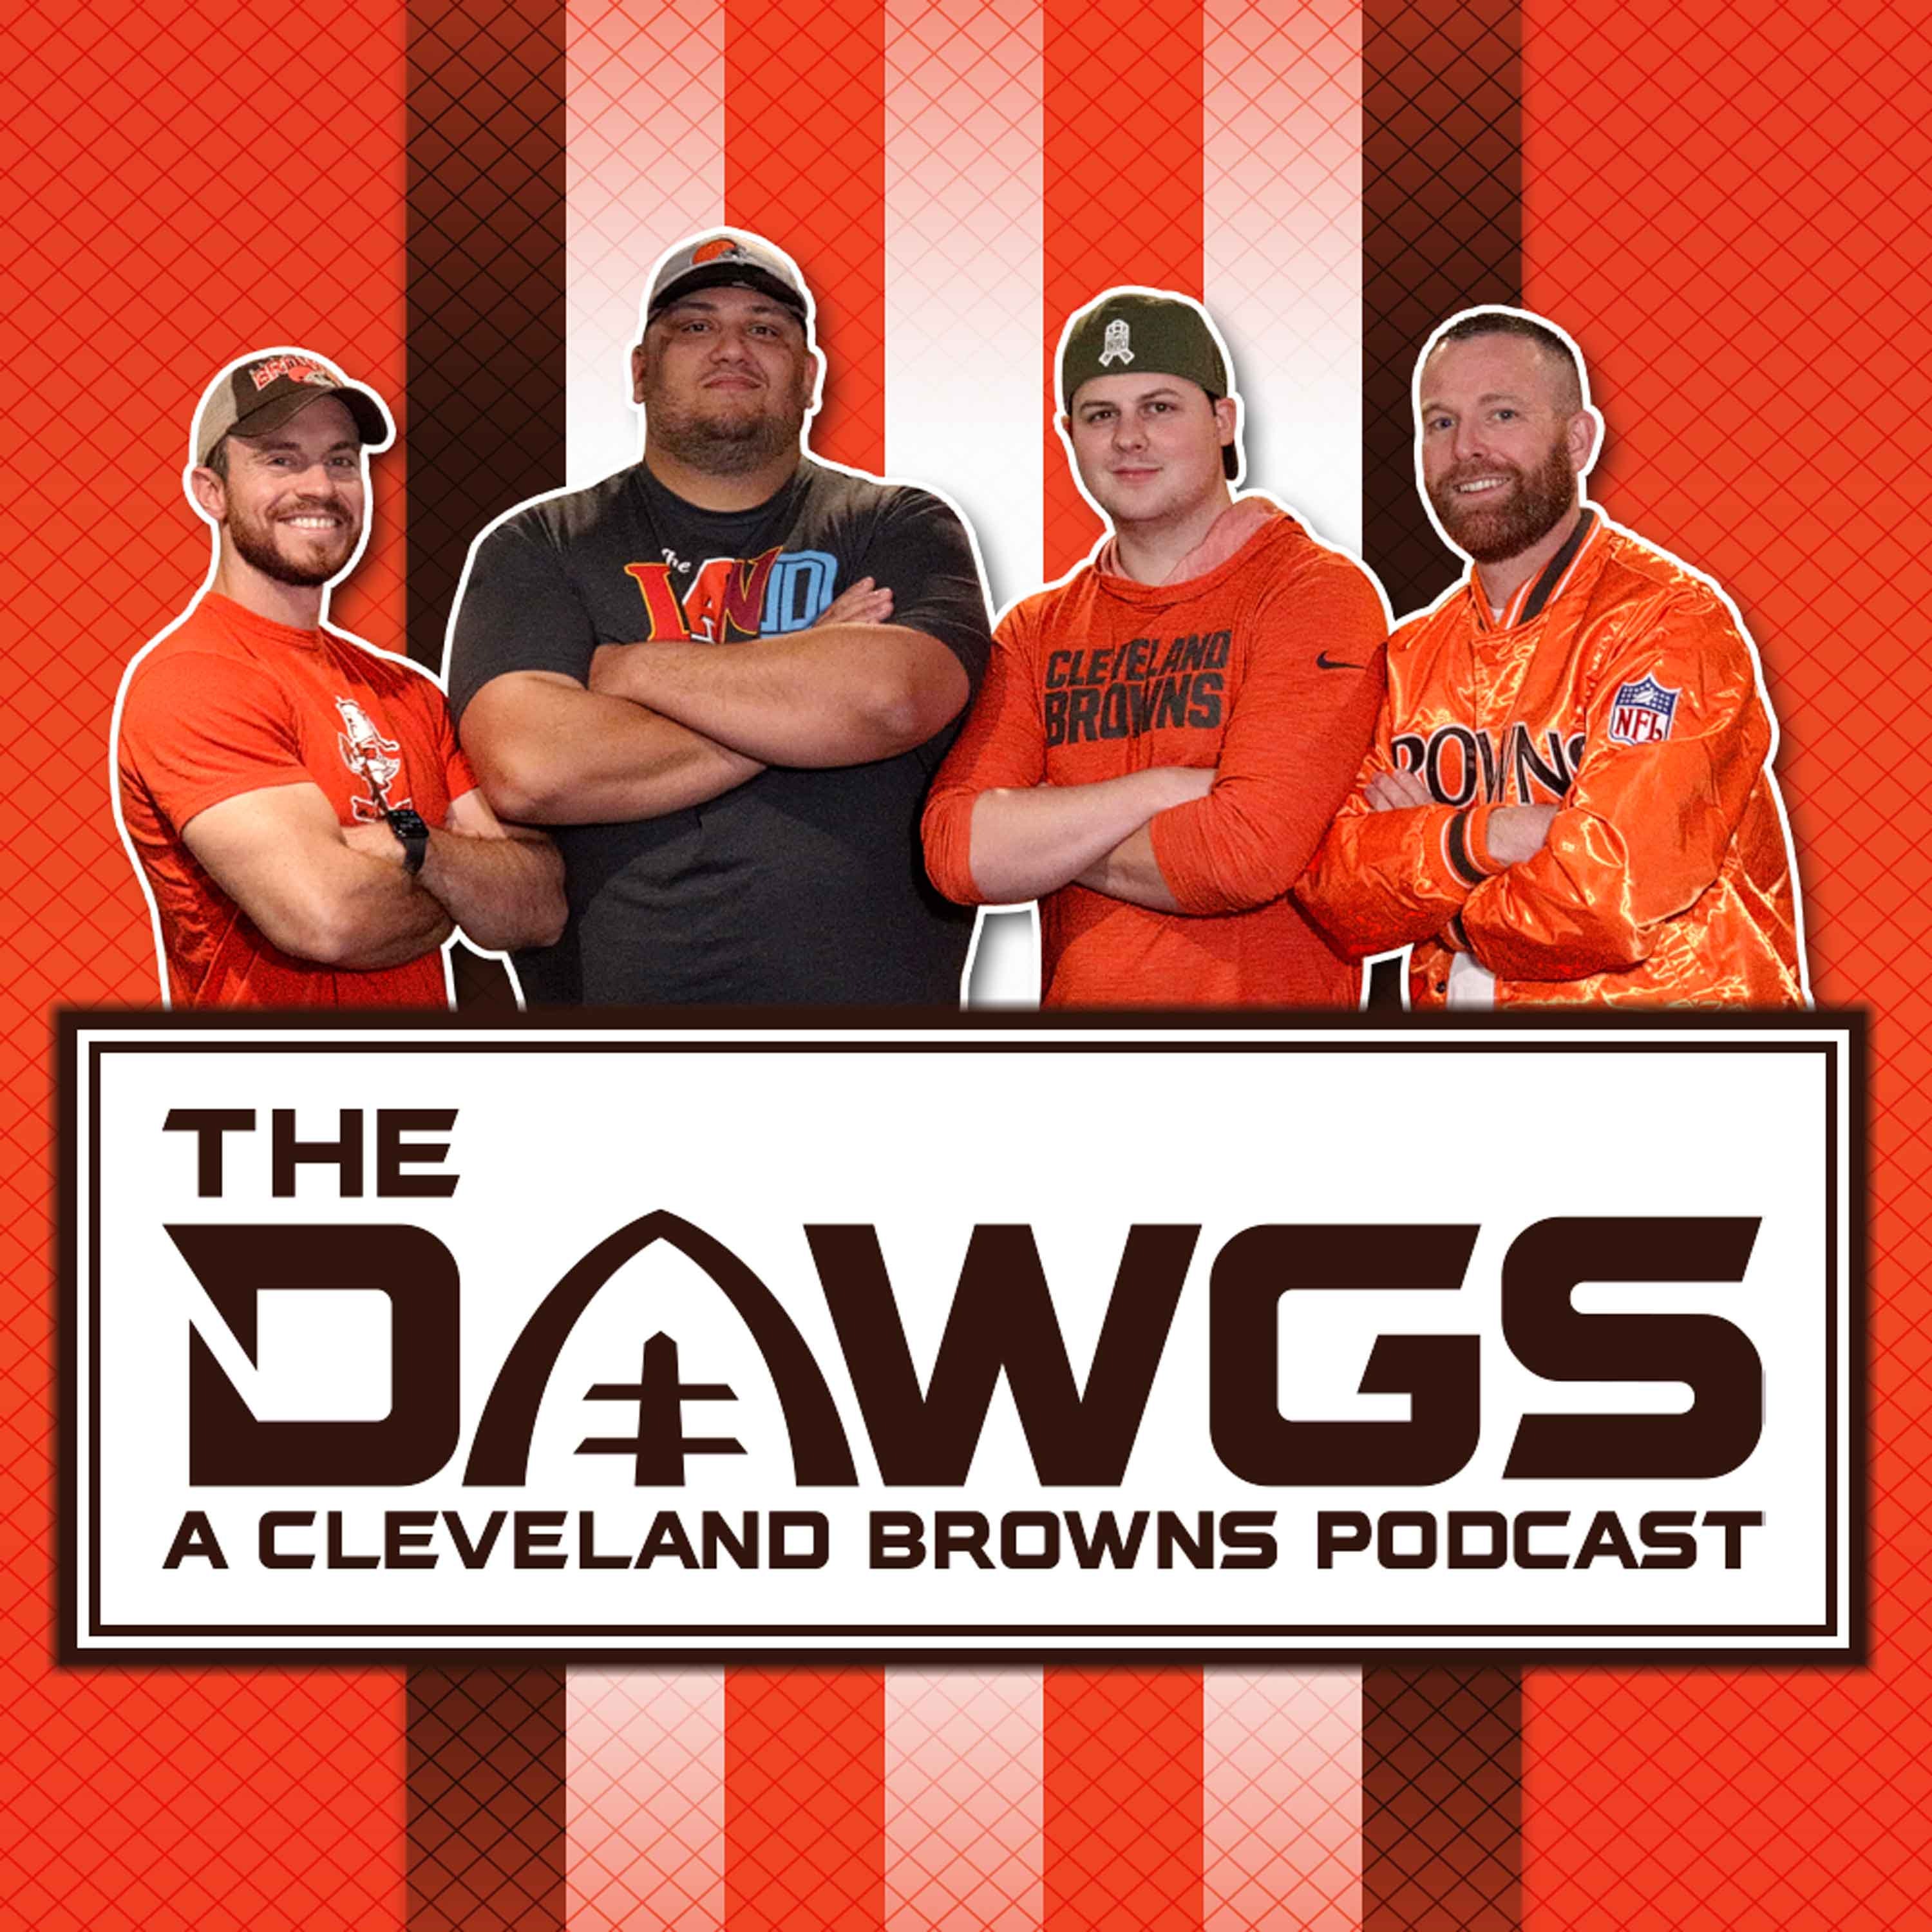 Week 12 Preview - Cleveland Browns vs Tampa Bay Buccaneers  | The Dawgs - A Cleveland Browns Podcast - November 24, 2022